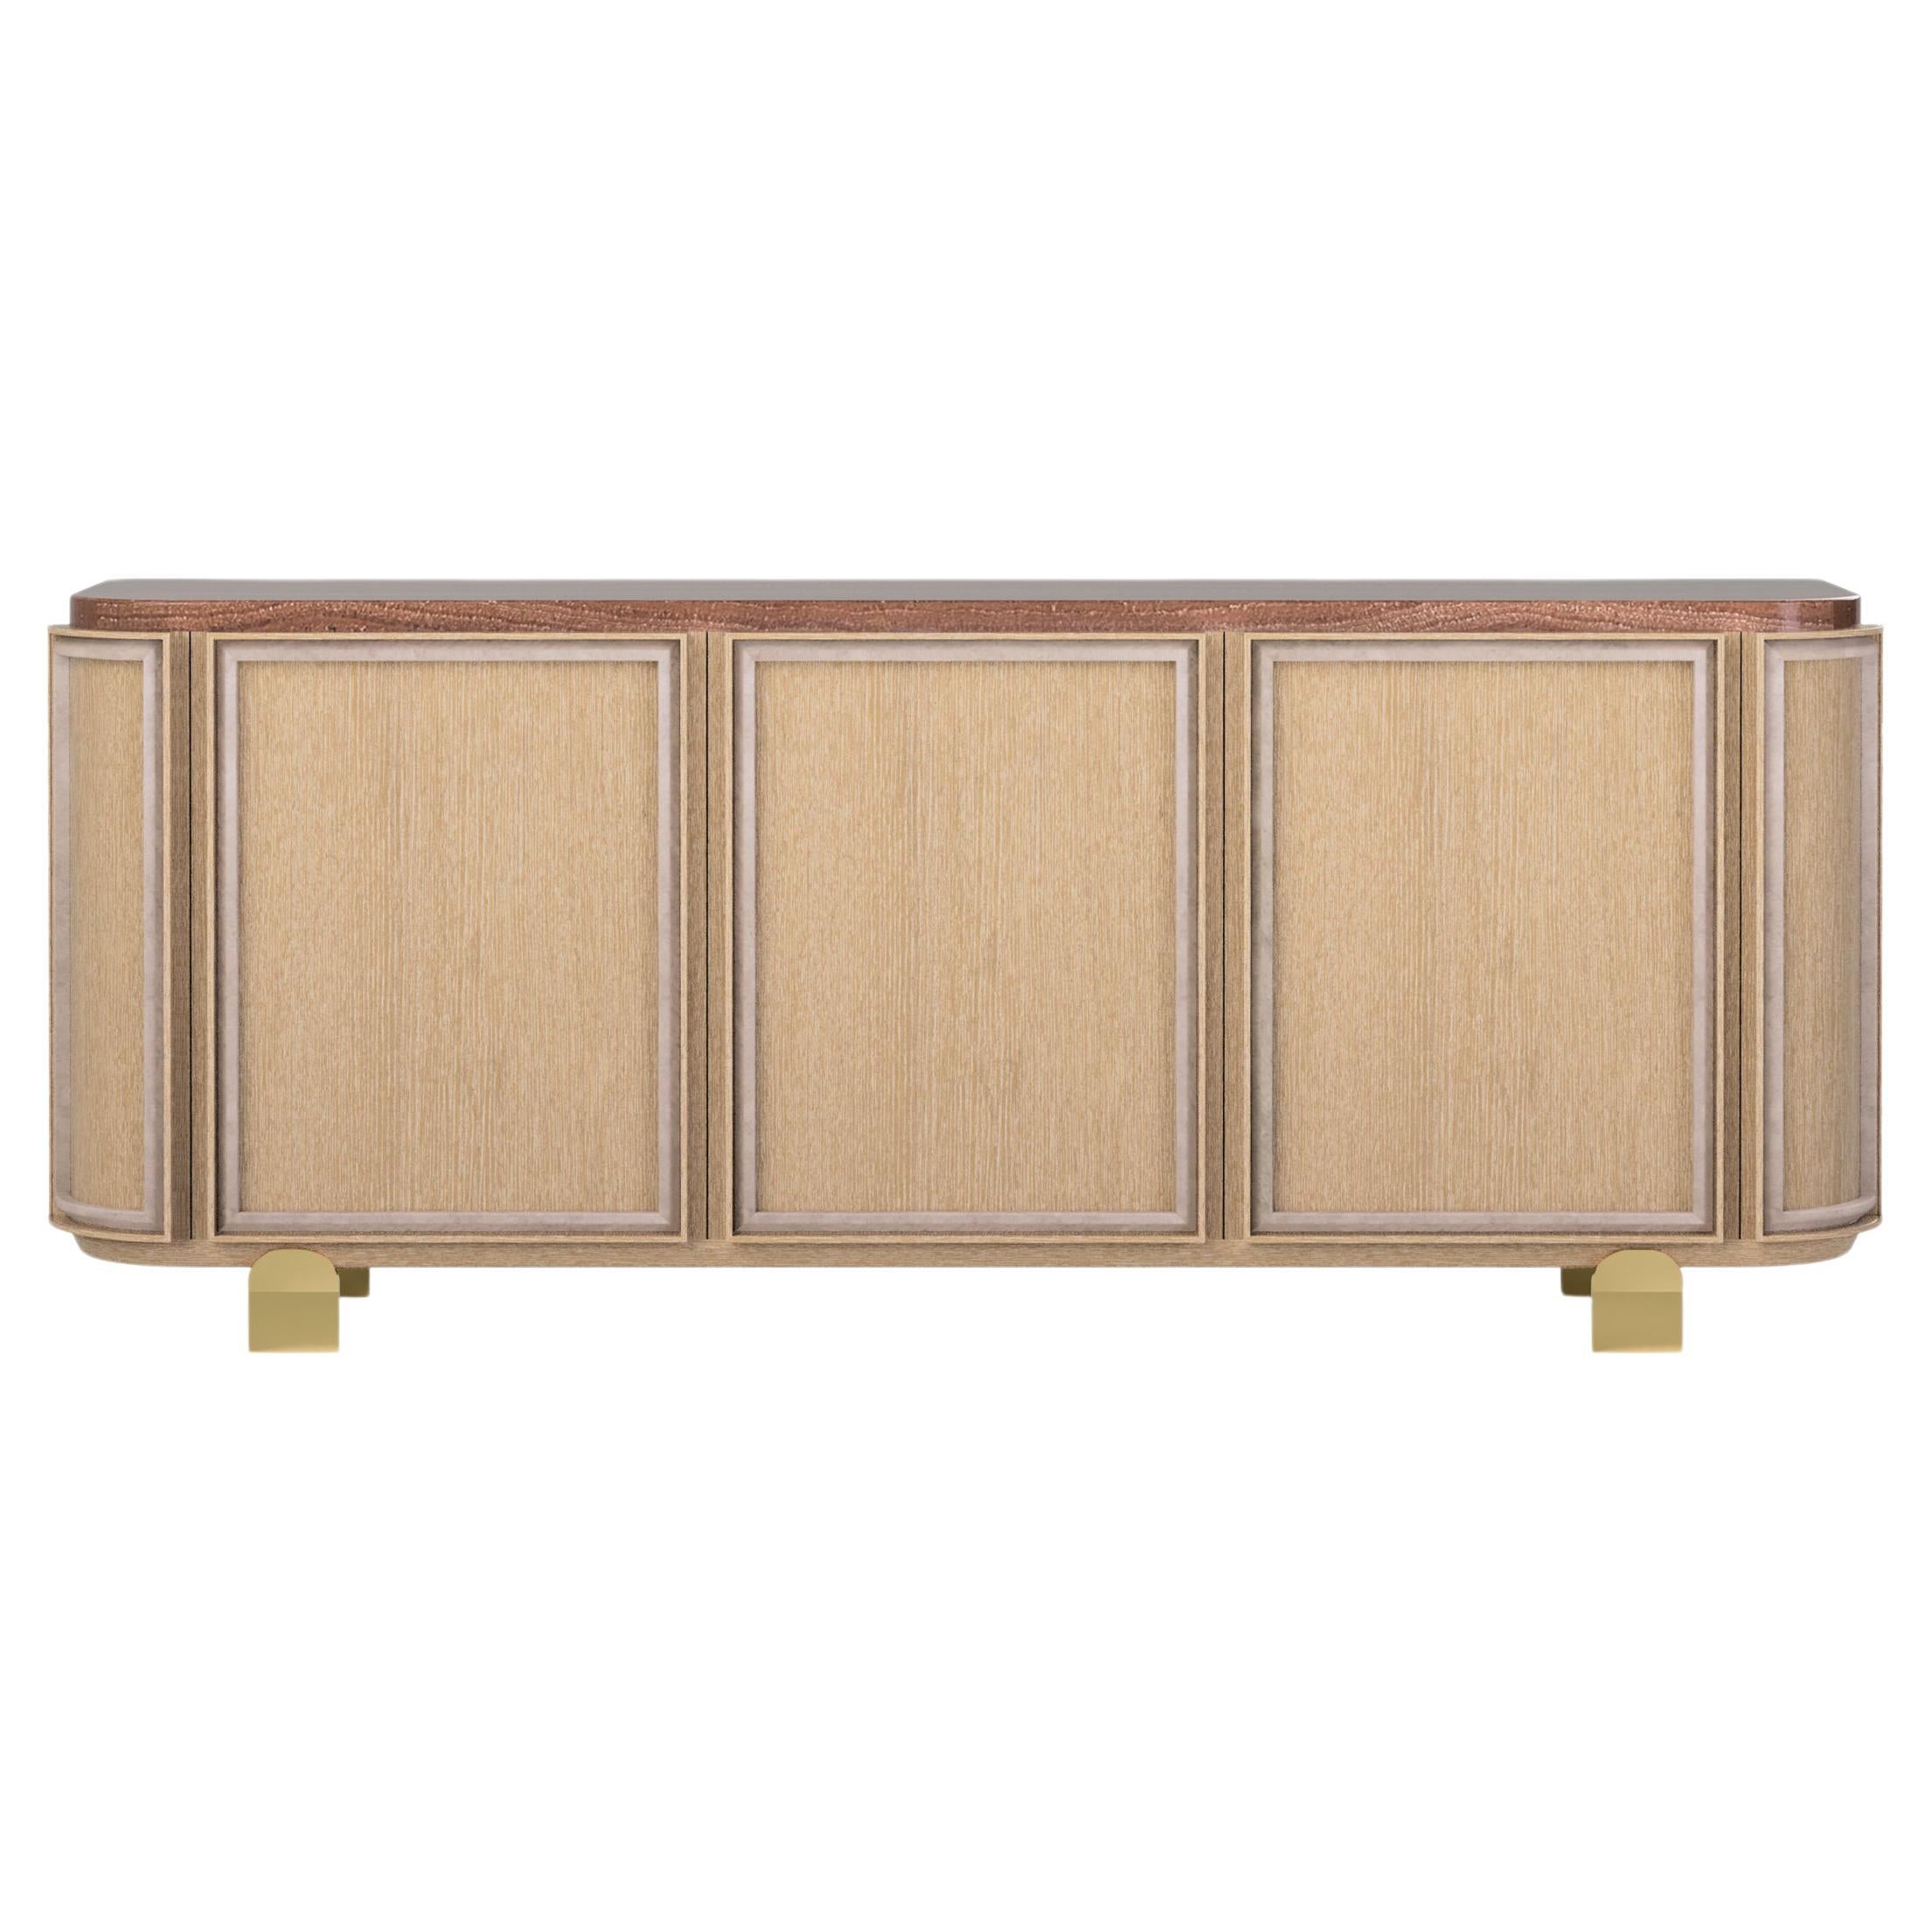  Credenza, Oak Body with Textured Lacquer Finish Details, Travertine Top  For Sale